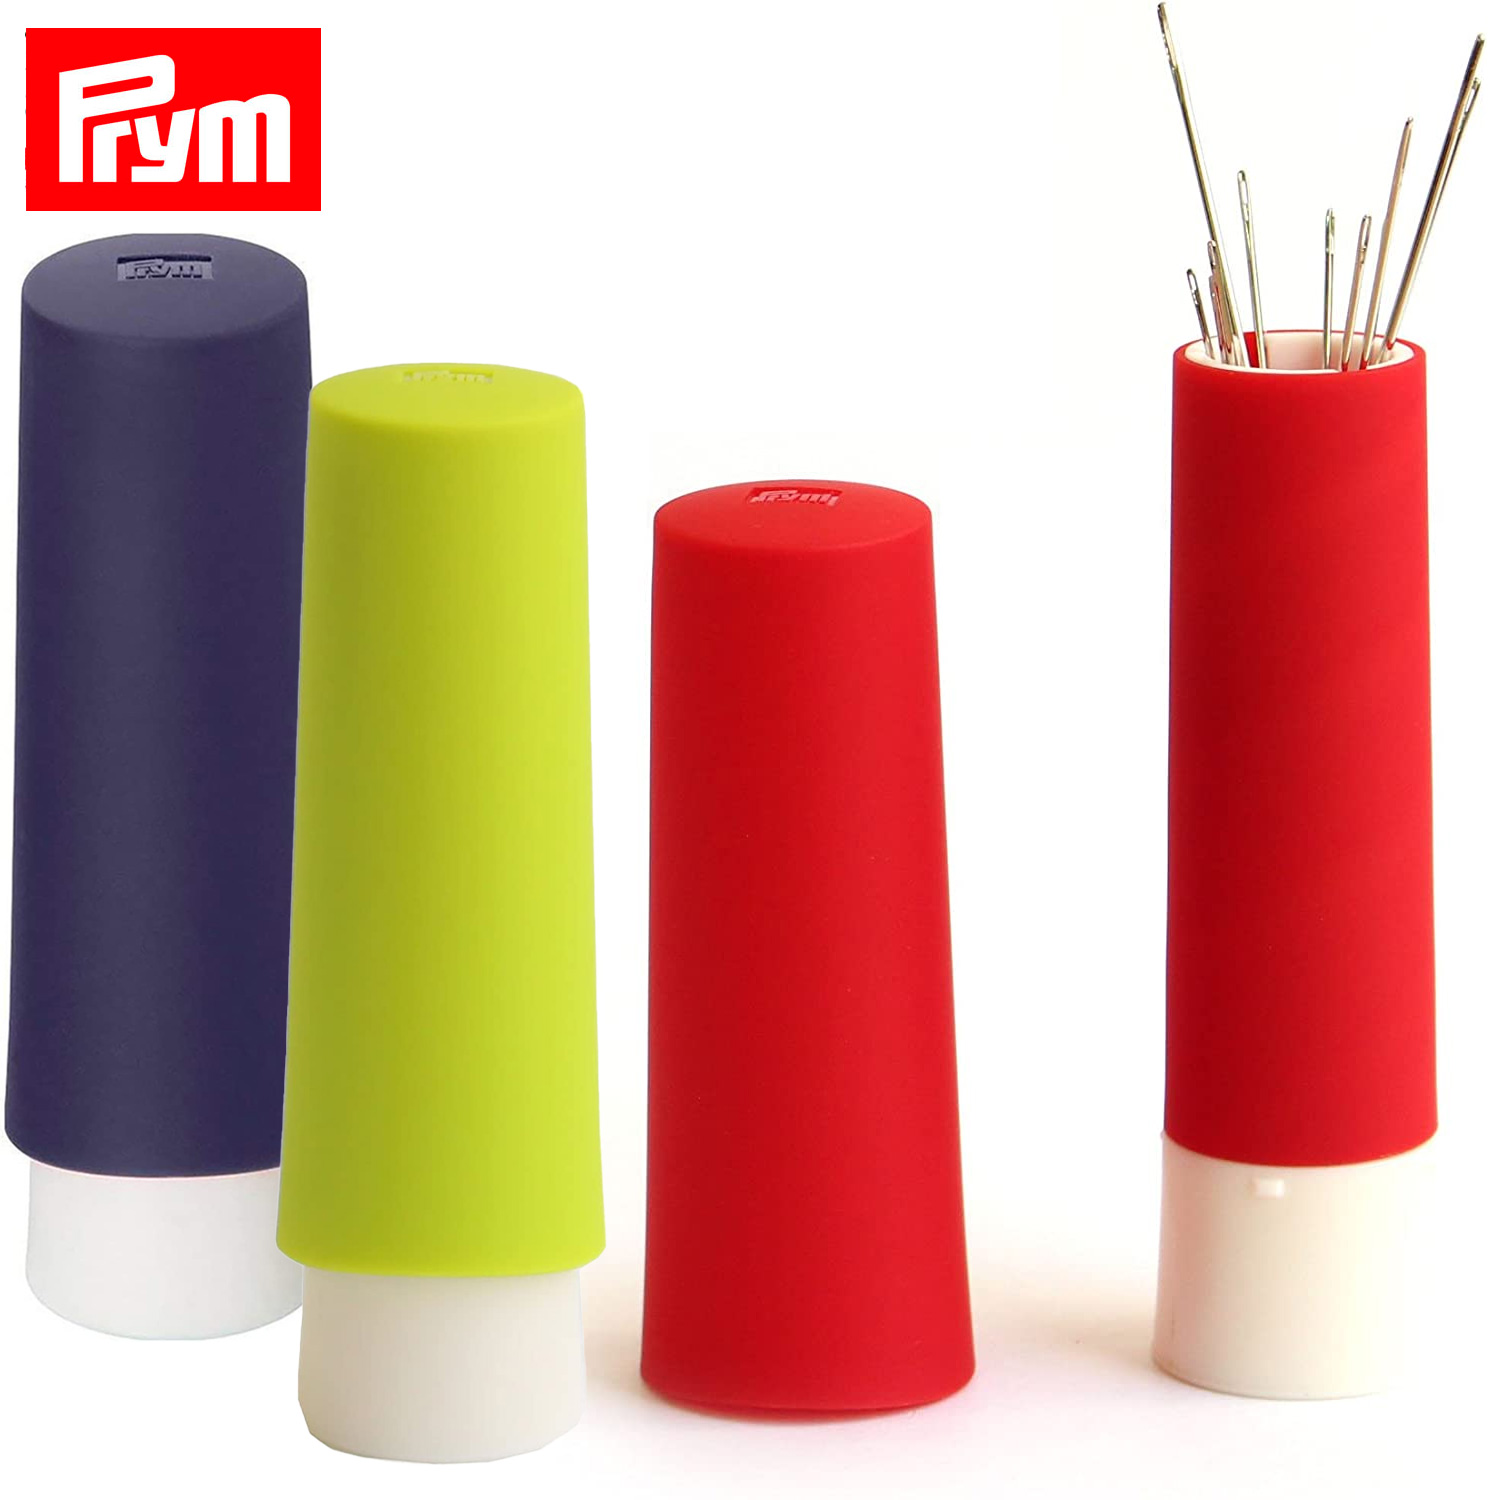 Prym Needle twister for storing sewing and darning needles (pcs)